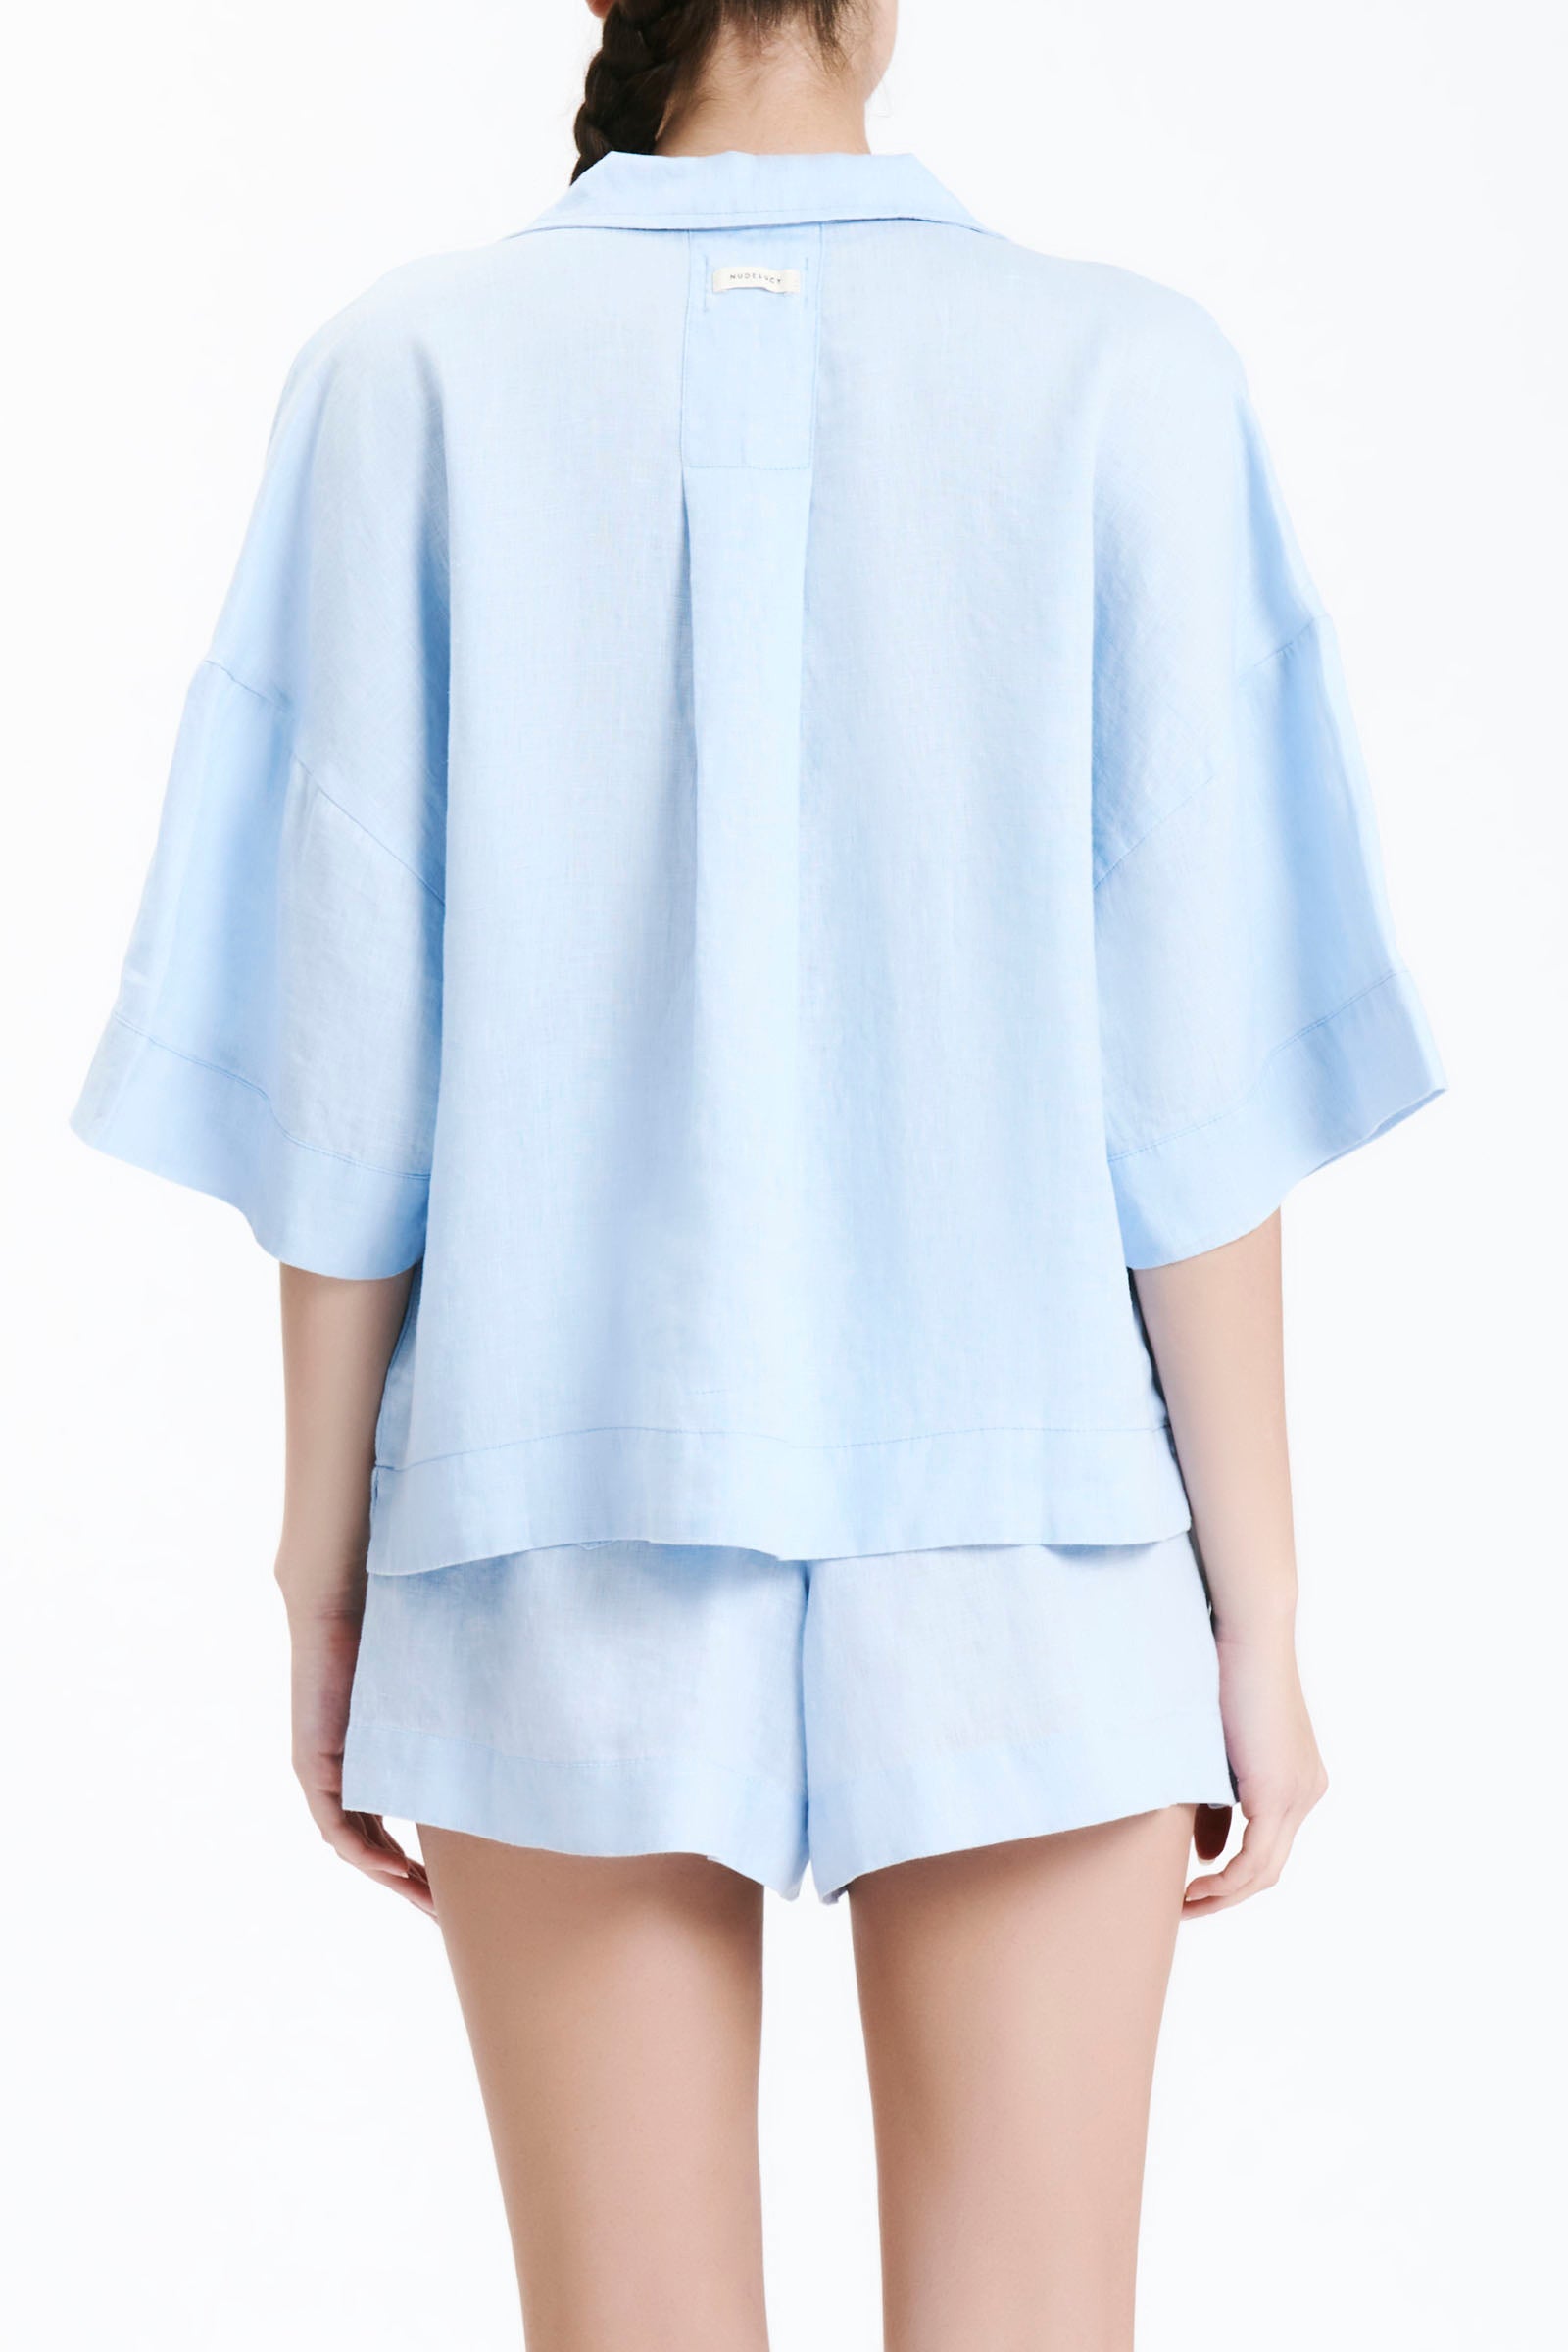 Nude Lucy Lounge Linen Shirt In A Blue Sky Colour 